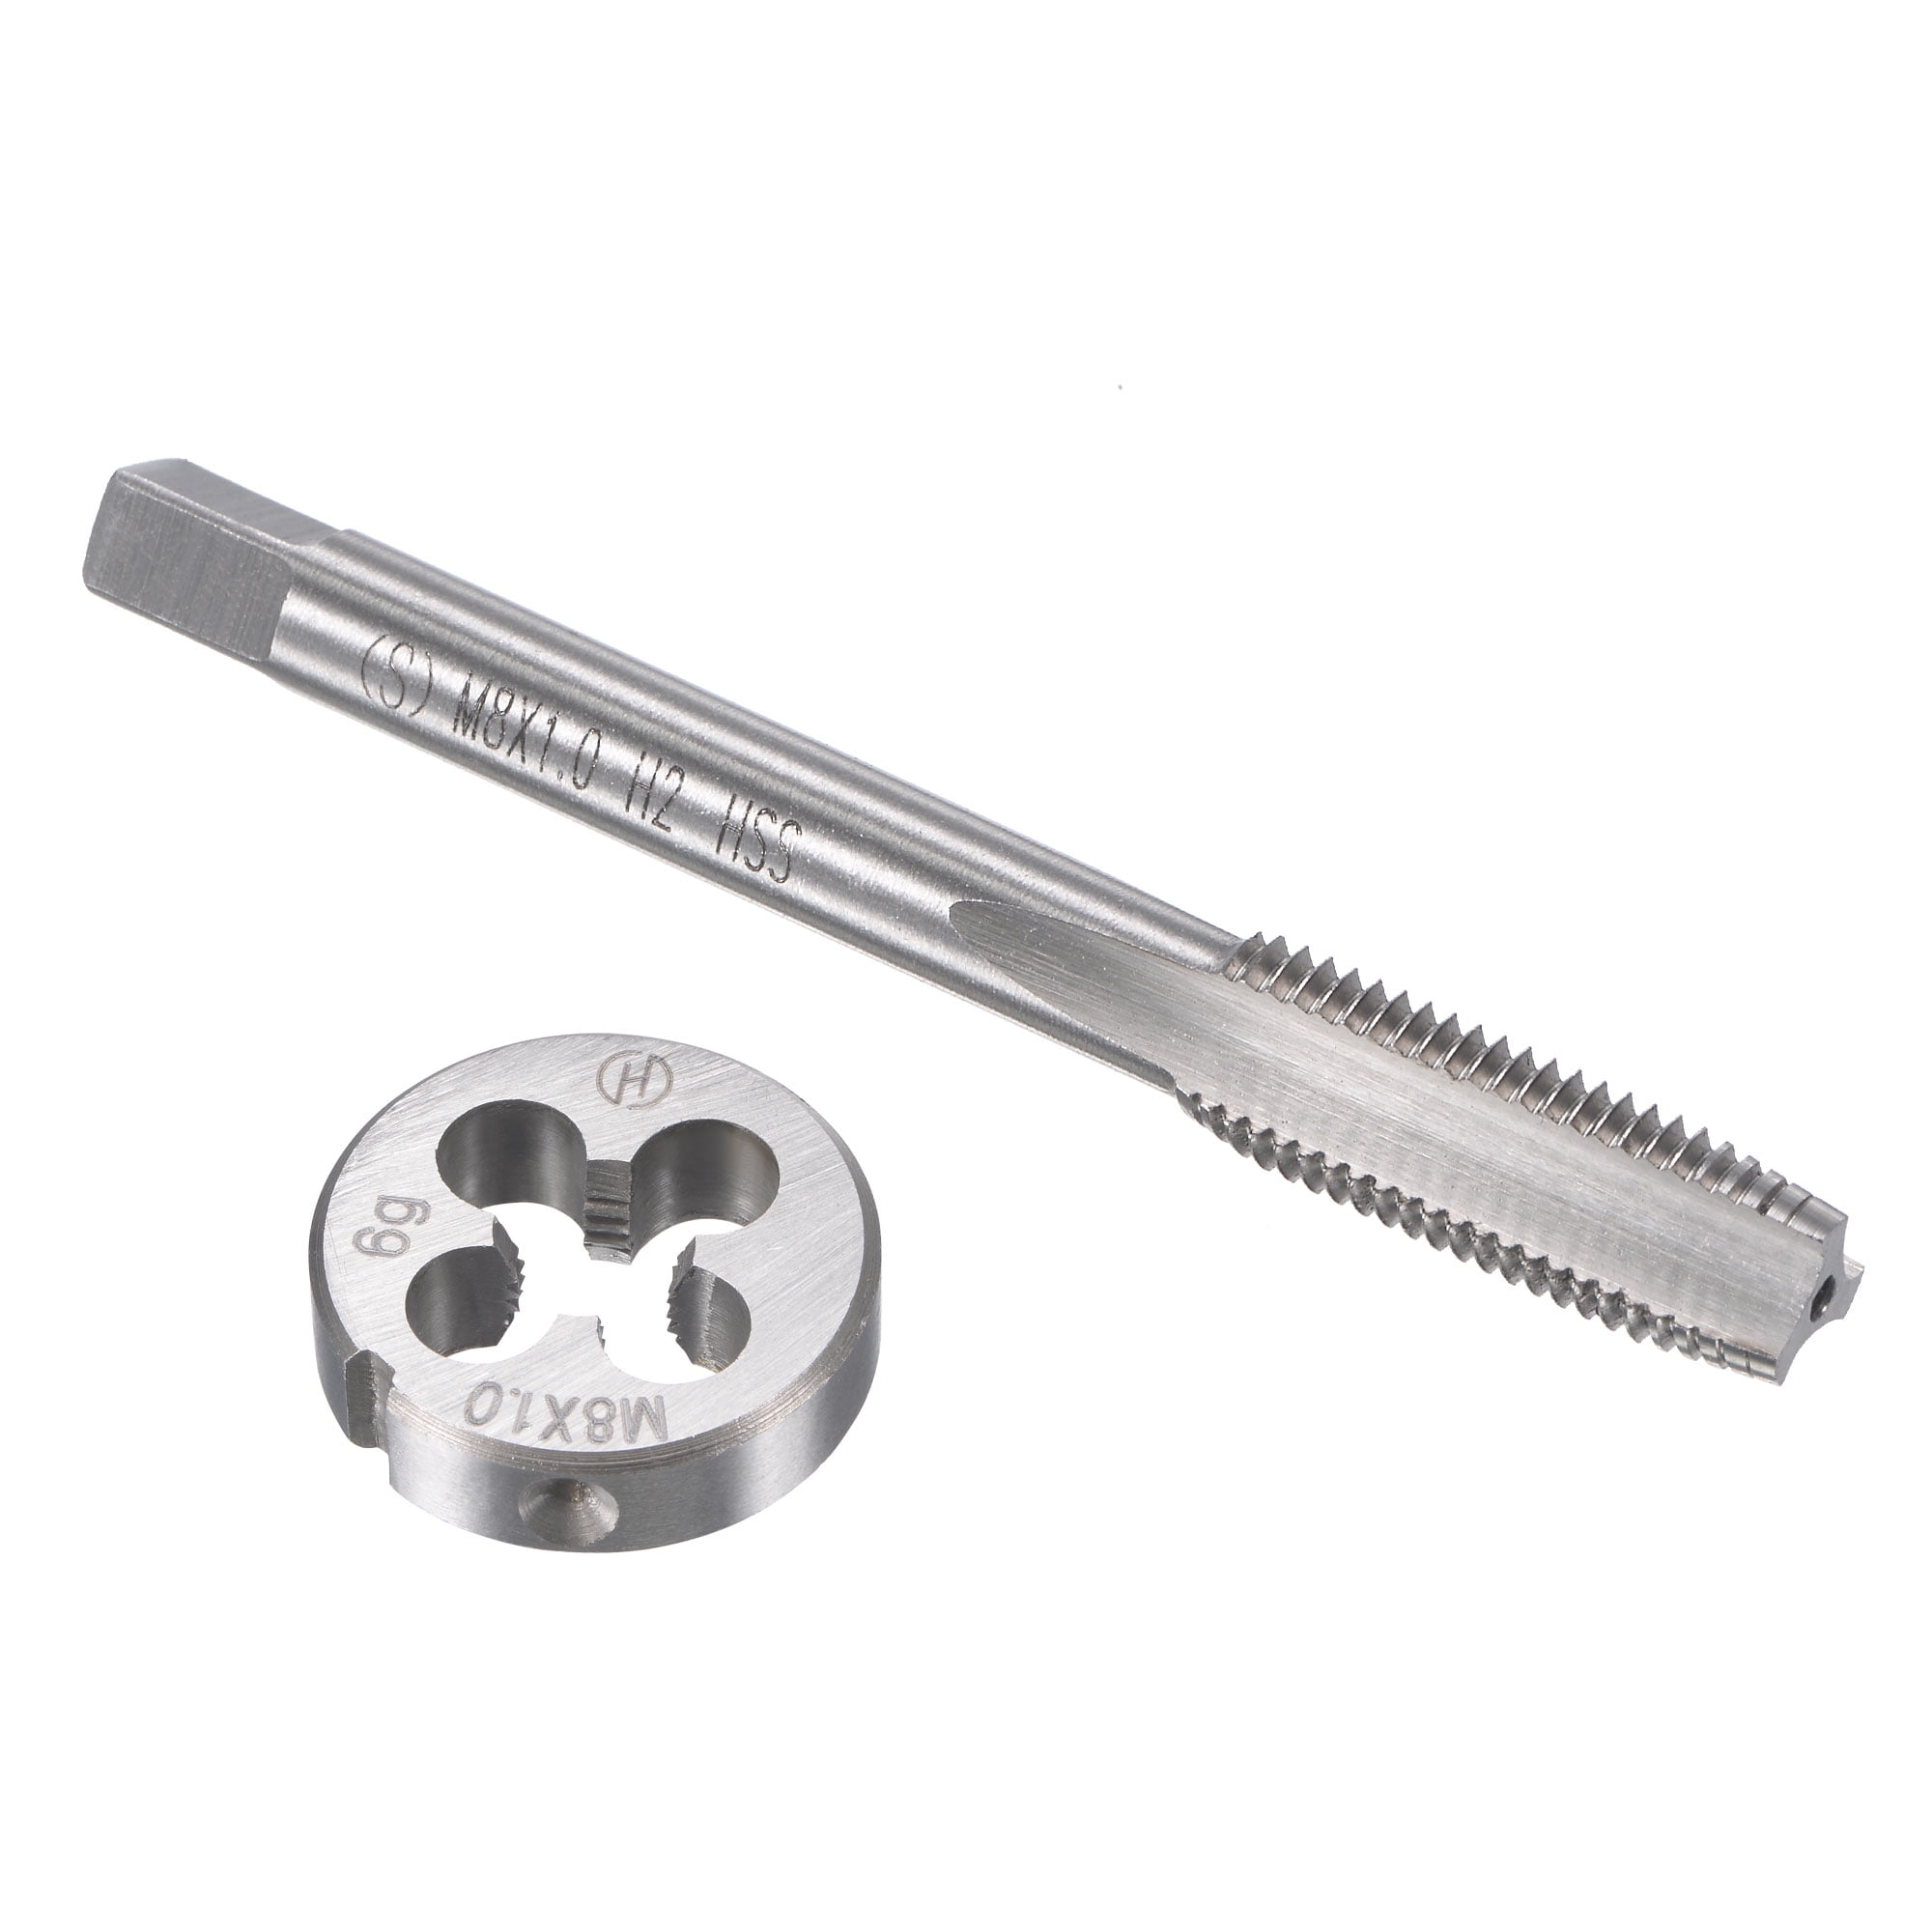 M10x1.25 Metric Tap + Die Alloy Steel RIGHT Hand Threading tool 10mm -1.25